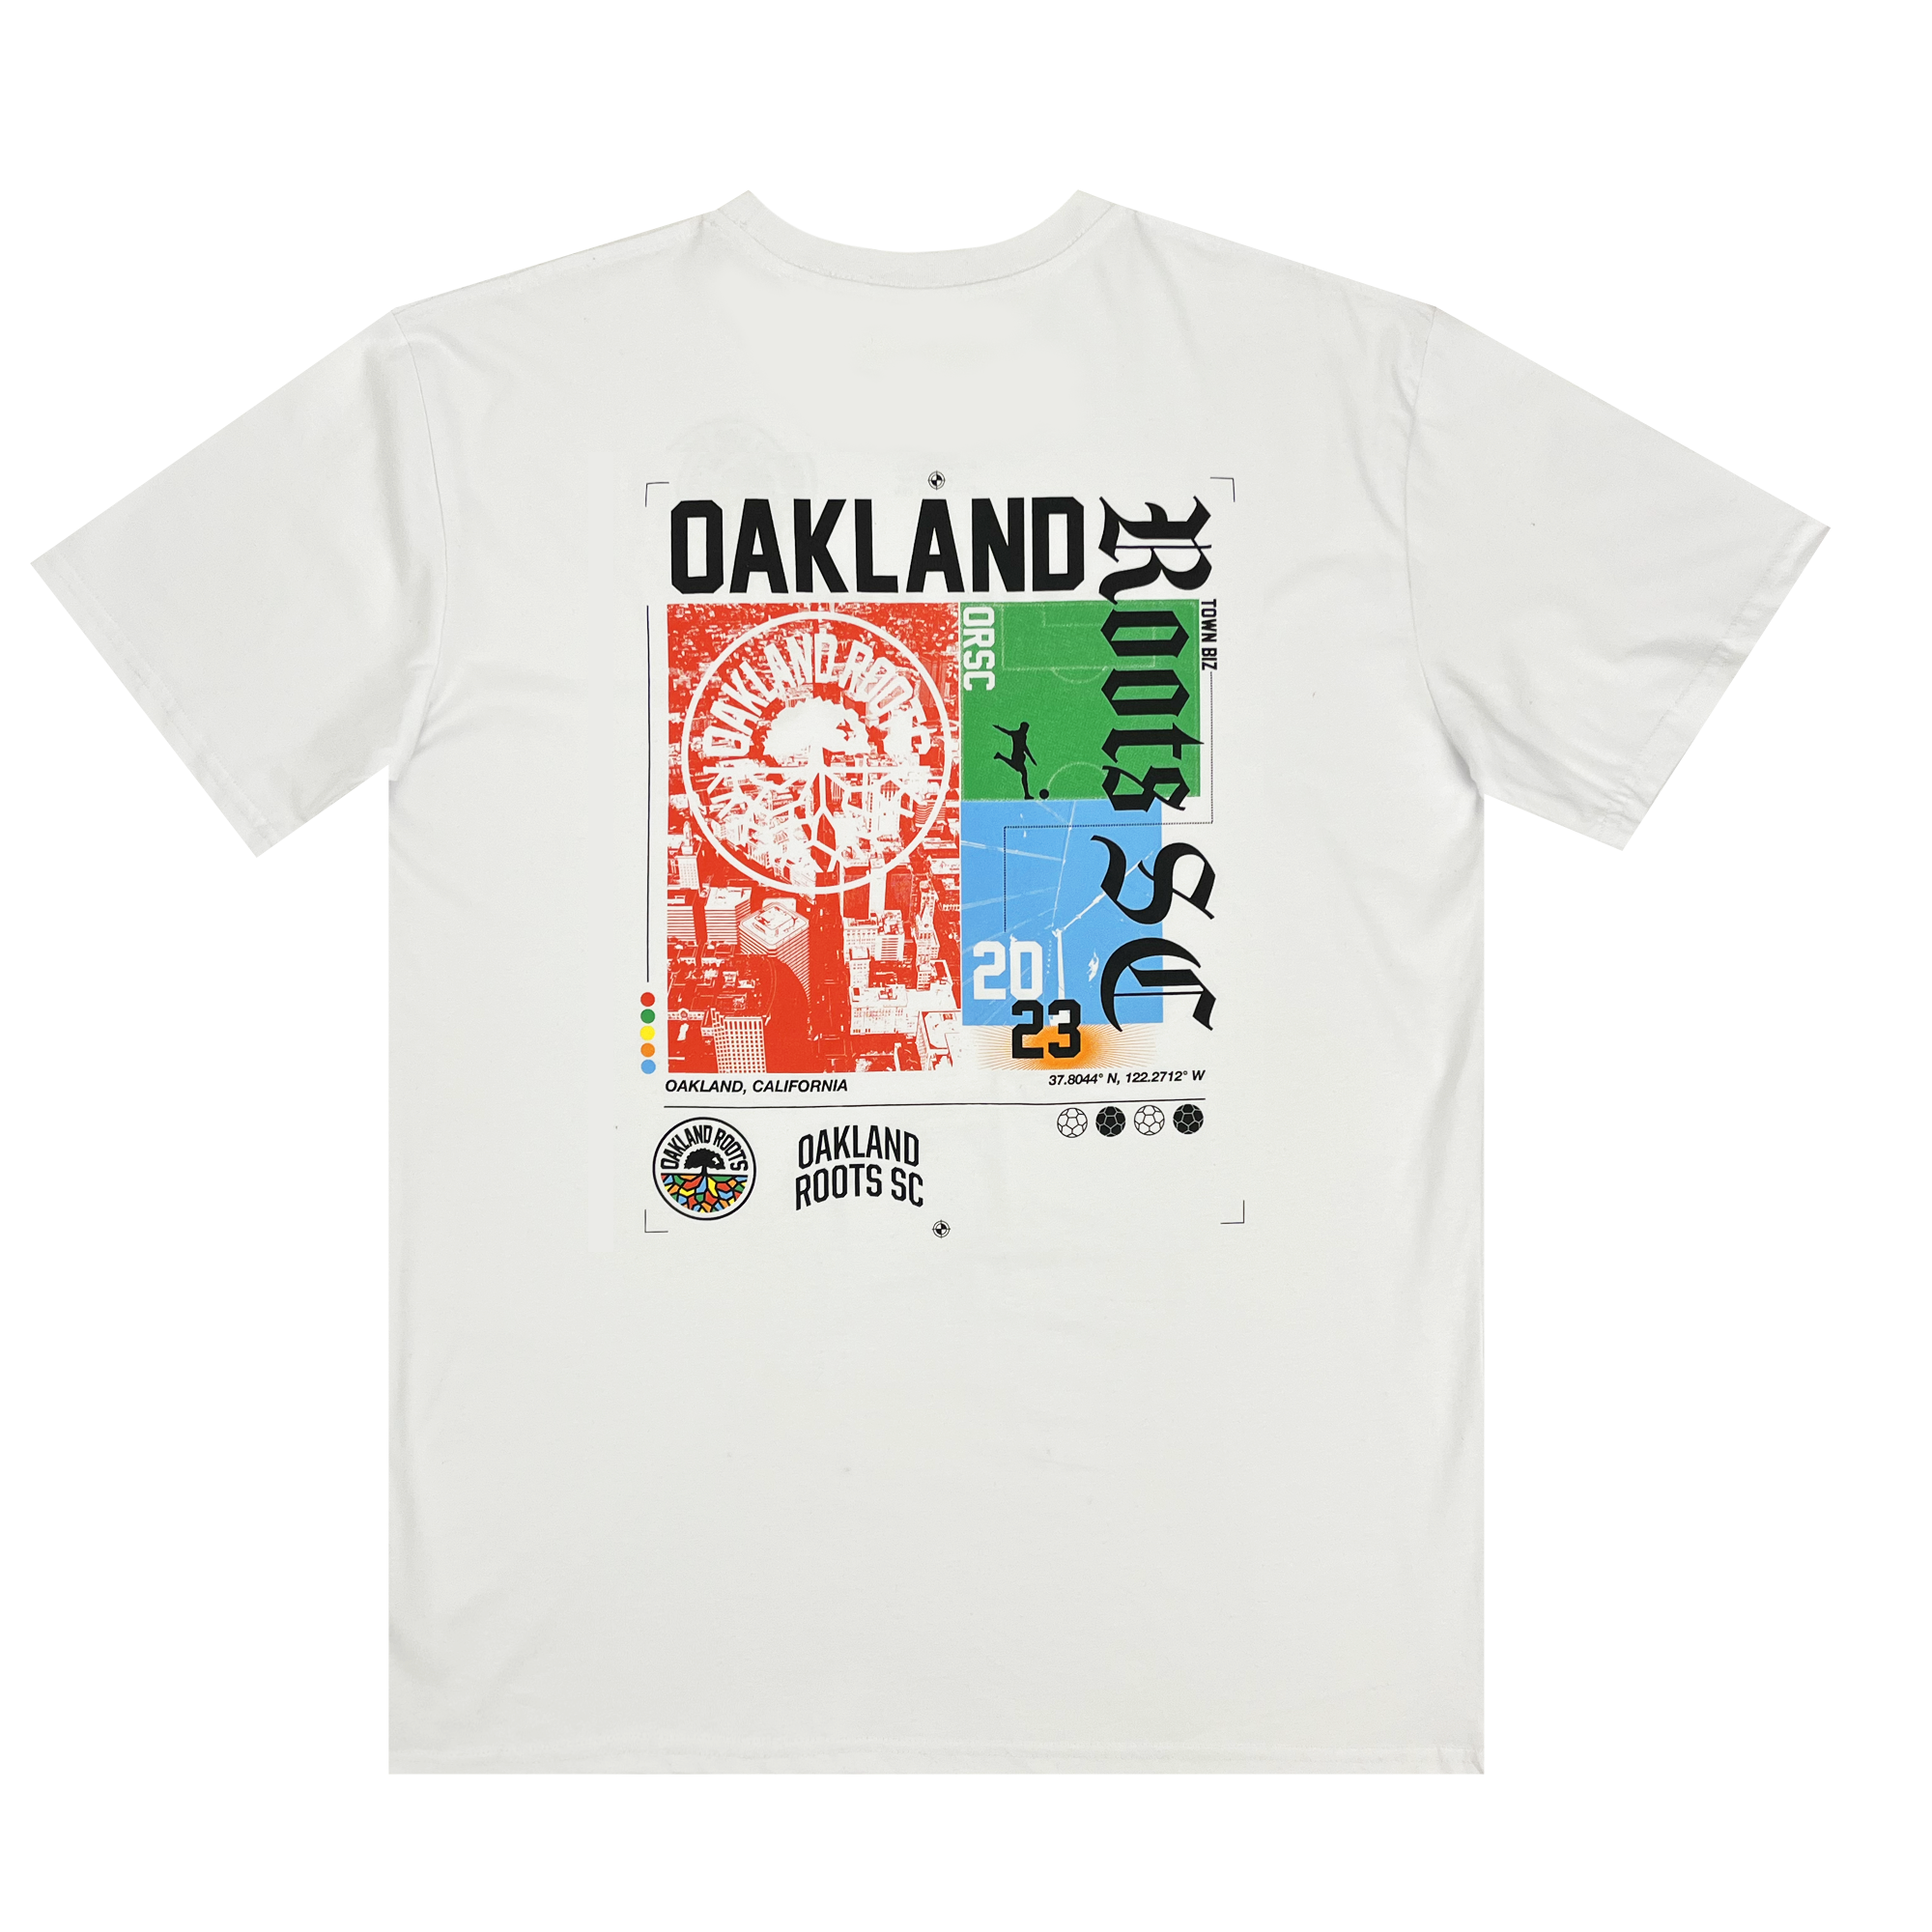 Backside view of a white cotton t-shirt with full-color Oakland Roots SC graphic with logos and wordmarks.